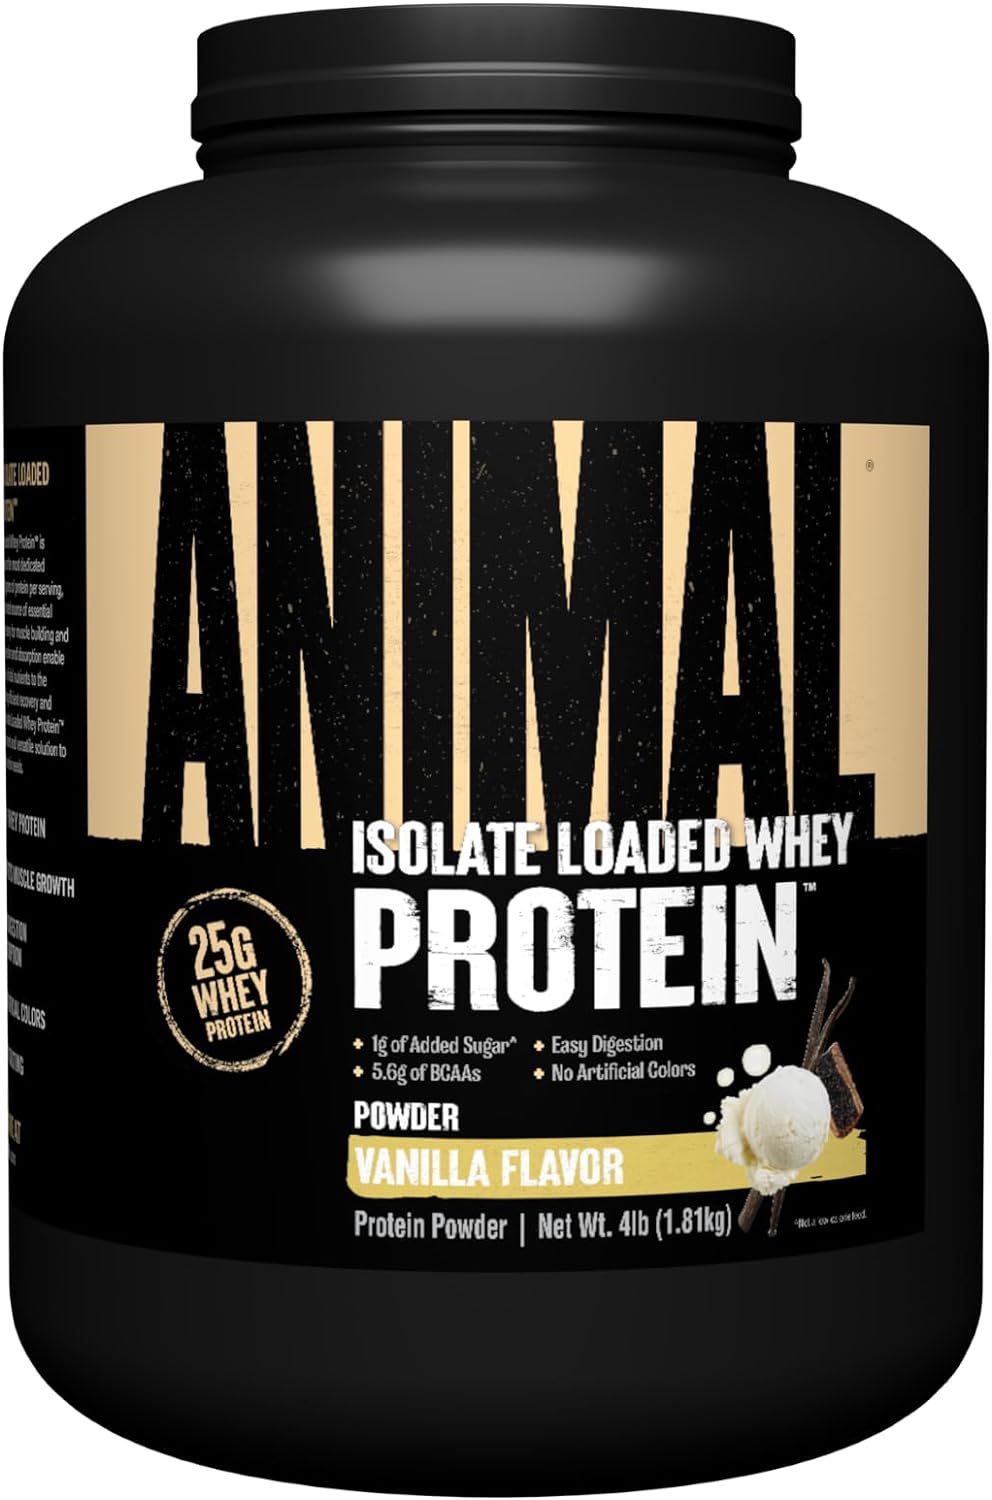 Animal Whey Isolate Whey Protein Powder ? Isolate Loaded for Post Workout and Recovery ? Low Sugar with Highly Digestible Whey Isolate Protein - Vanilla - 4 Pound (Pack of 1) (Packaging May Vary)